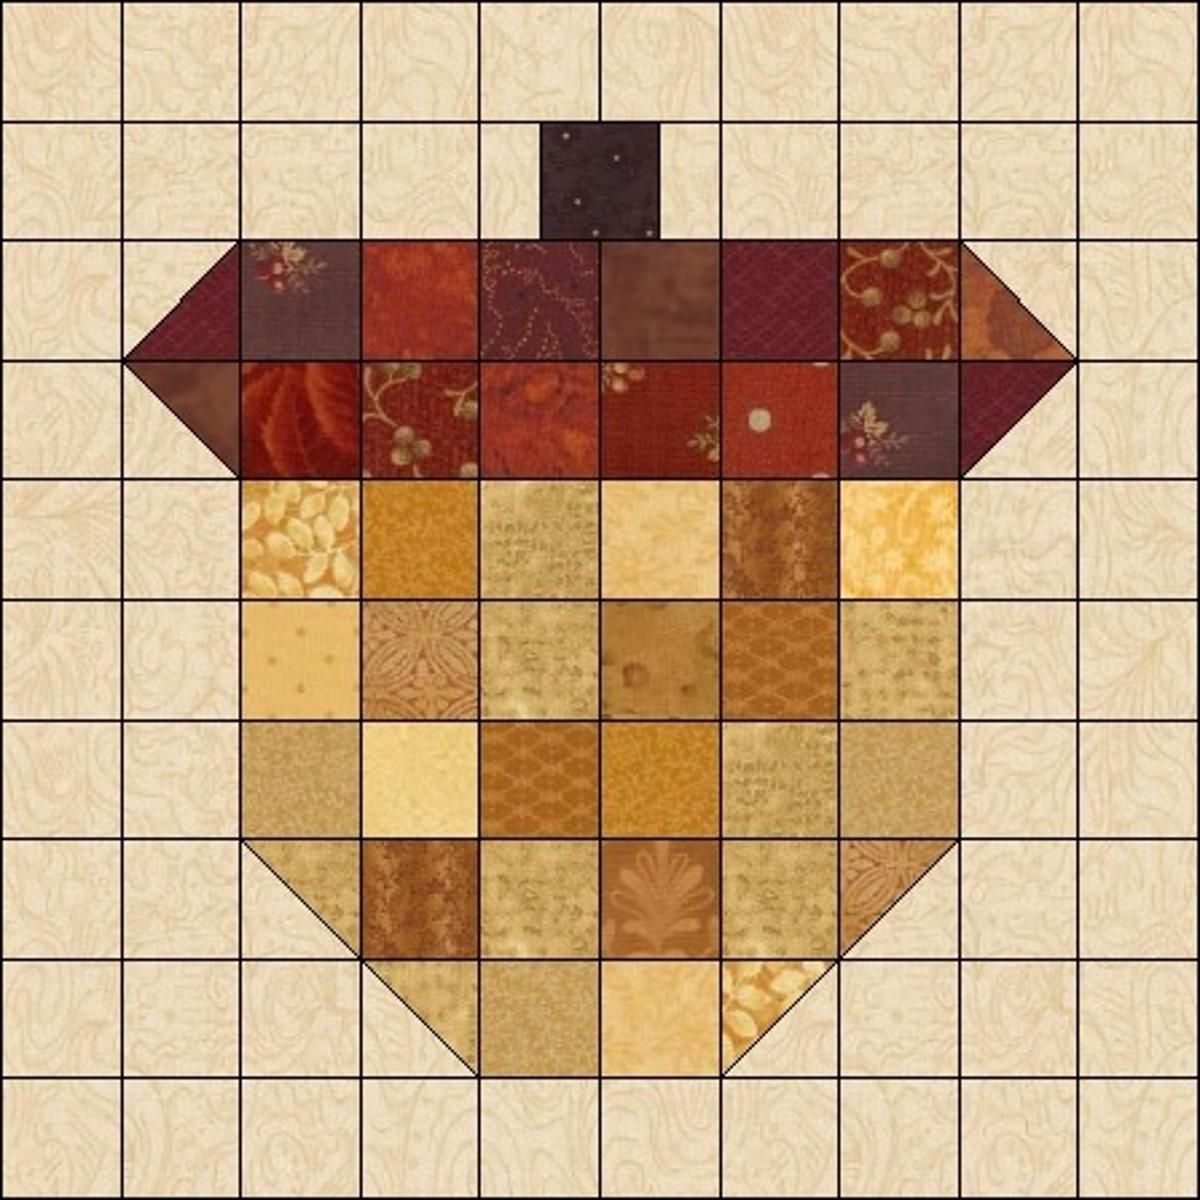 Acorn Quilt Block Pattern In 2020 Fall Quilt Patterns Fall Quilts 